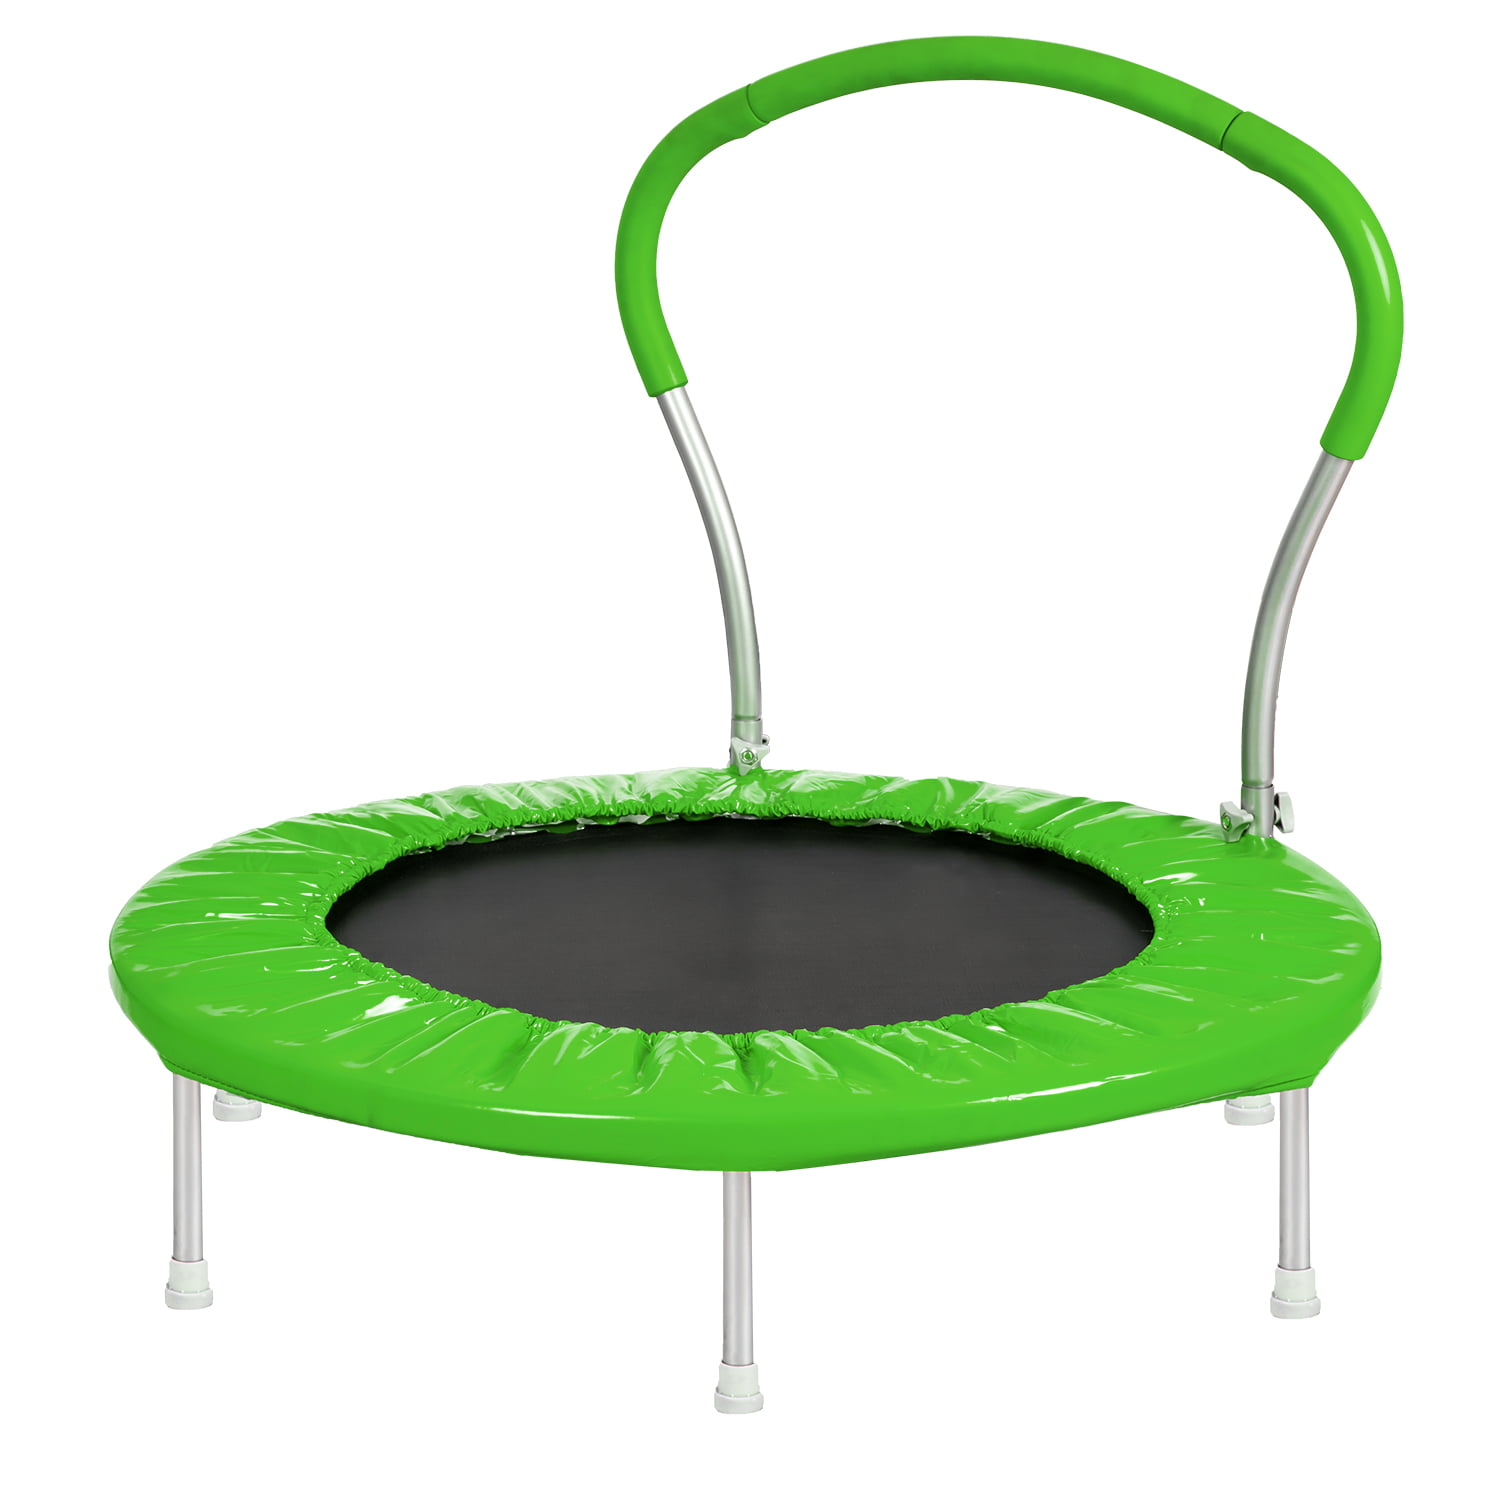 Andoer 36 INCH TRAMPOLINE WITH HANDLE()